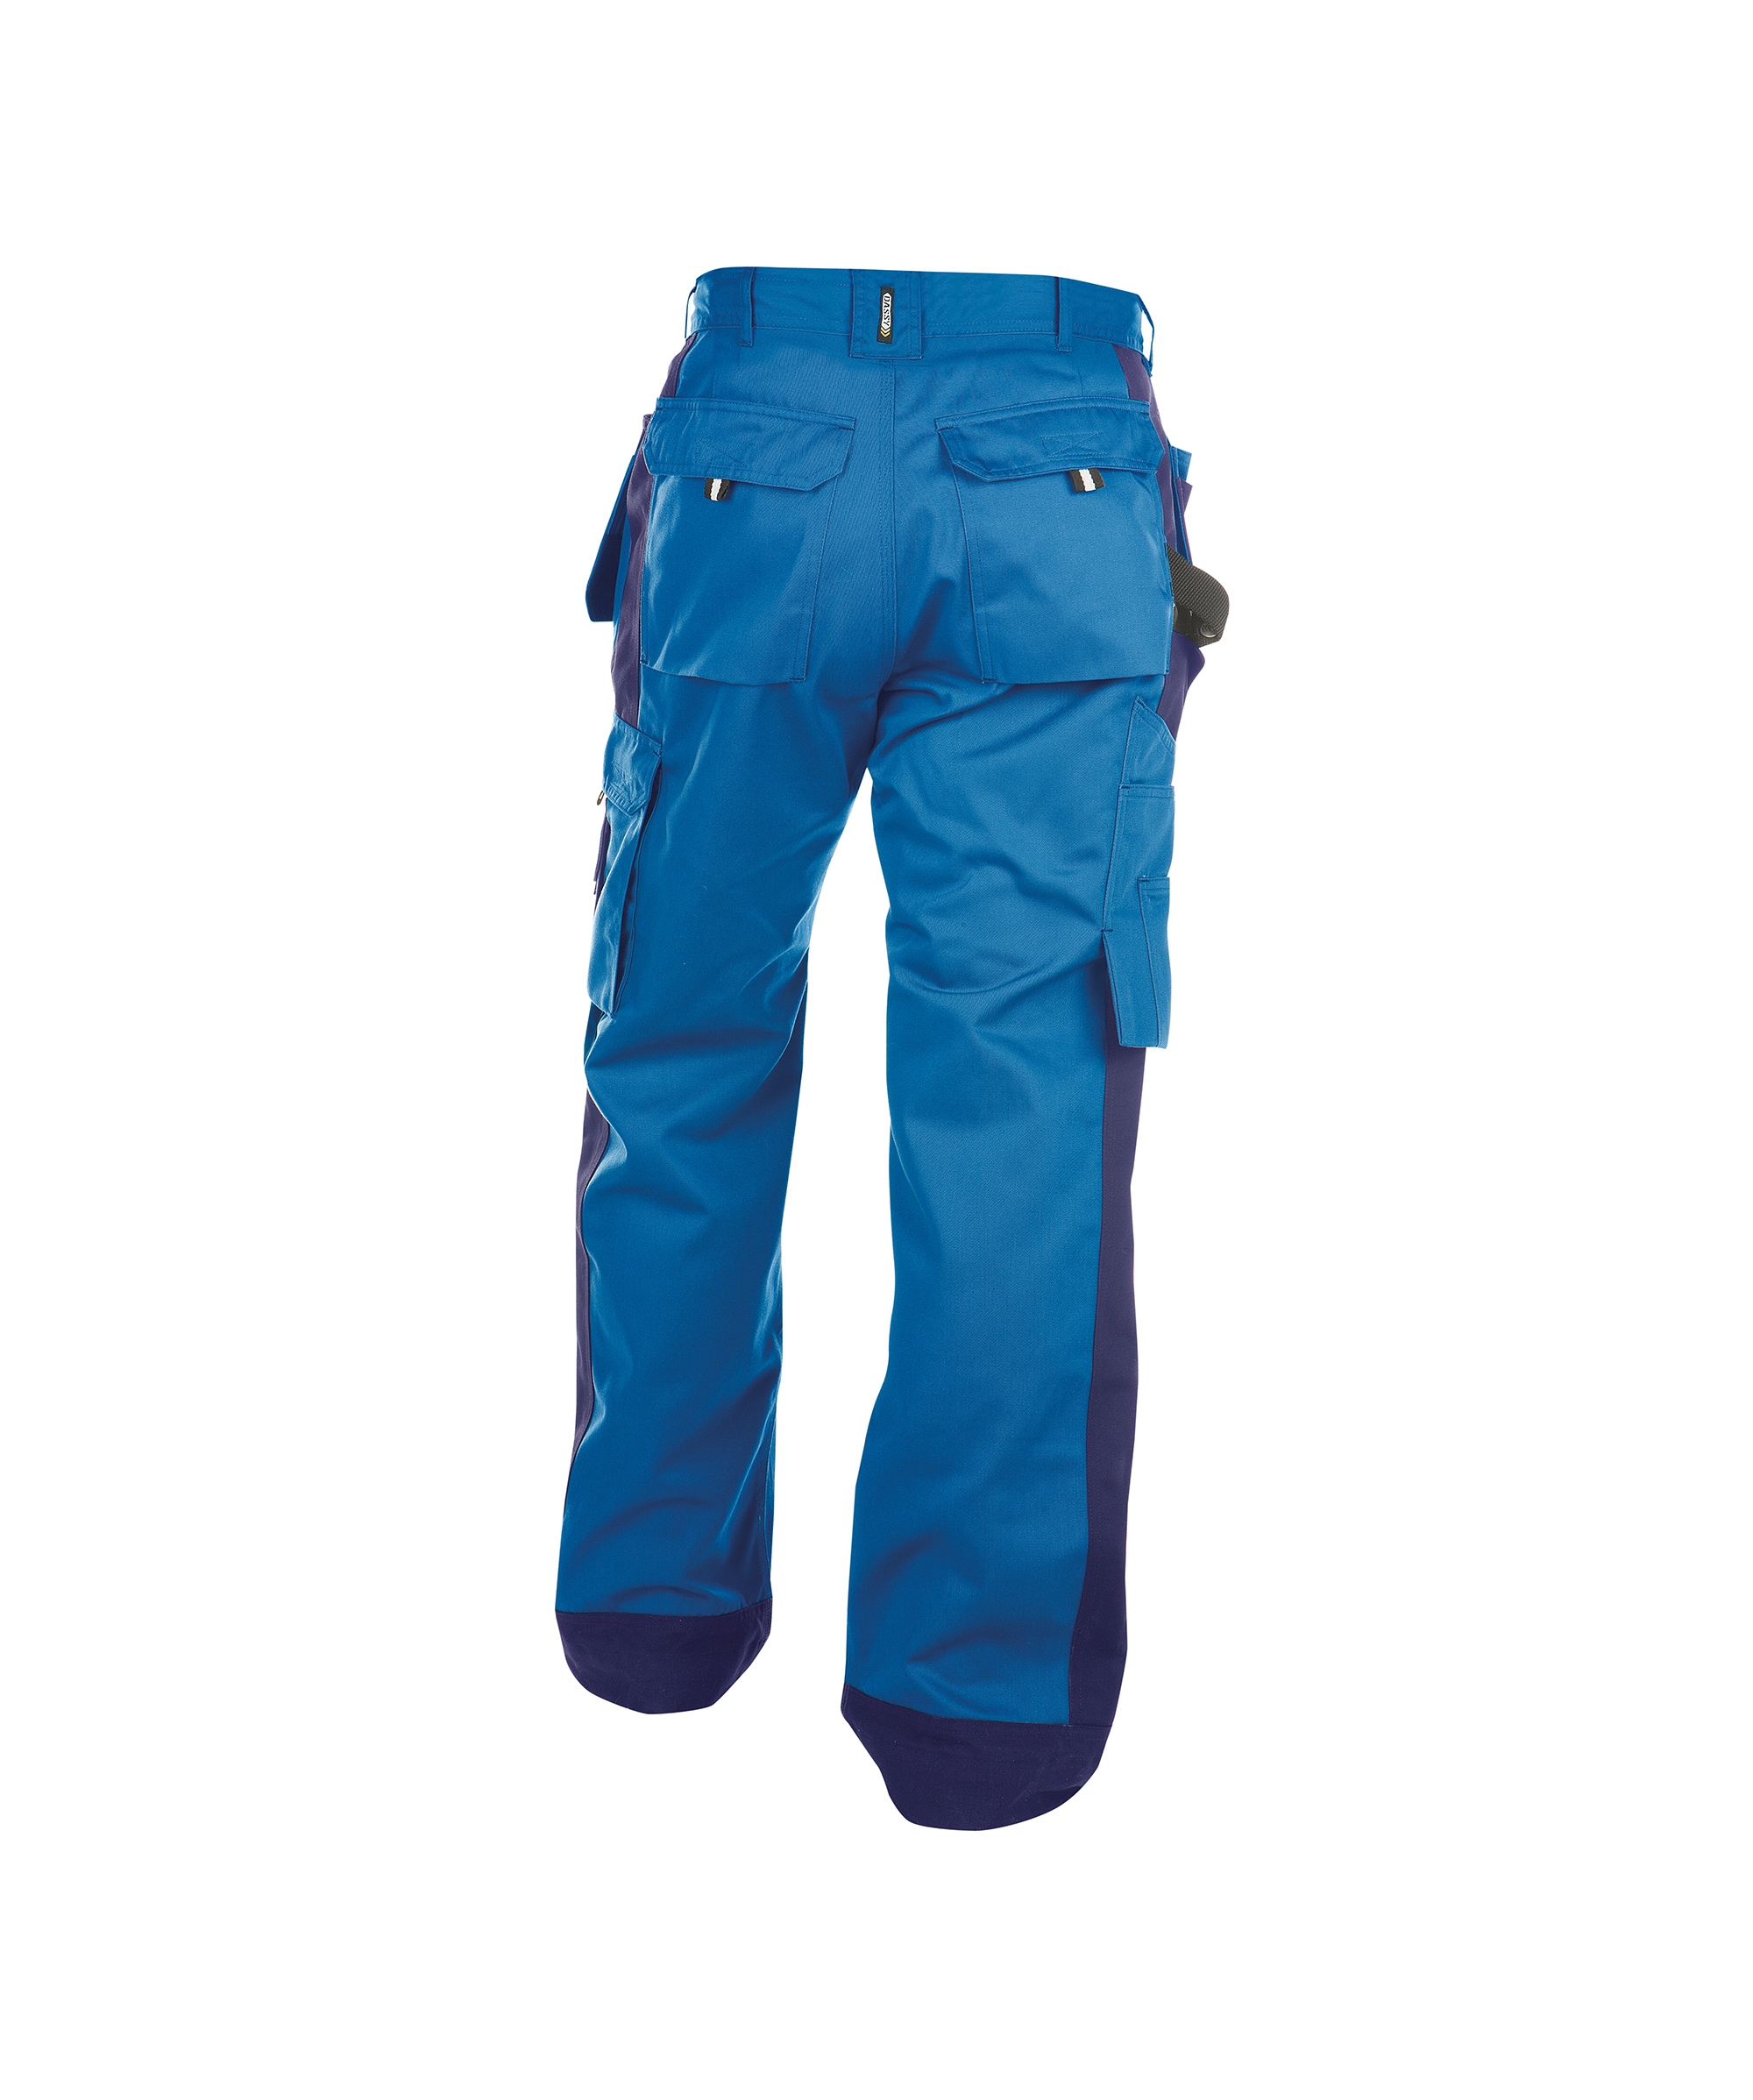 seattle_two-tone-work-trousers-with-multi-pockets-and-knee-pockets_royal-blue-navy_back.jpg